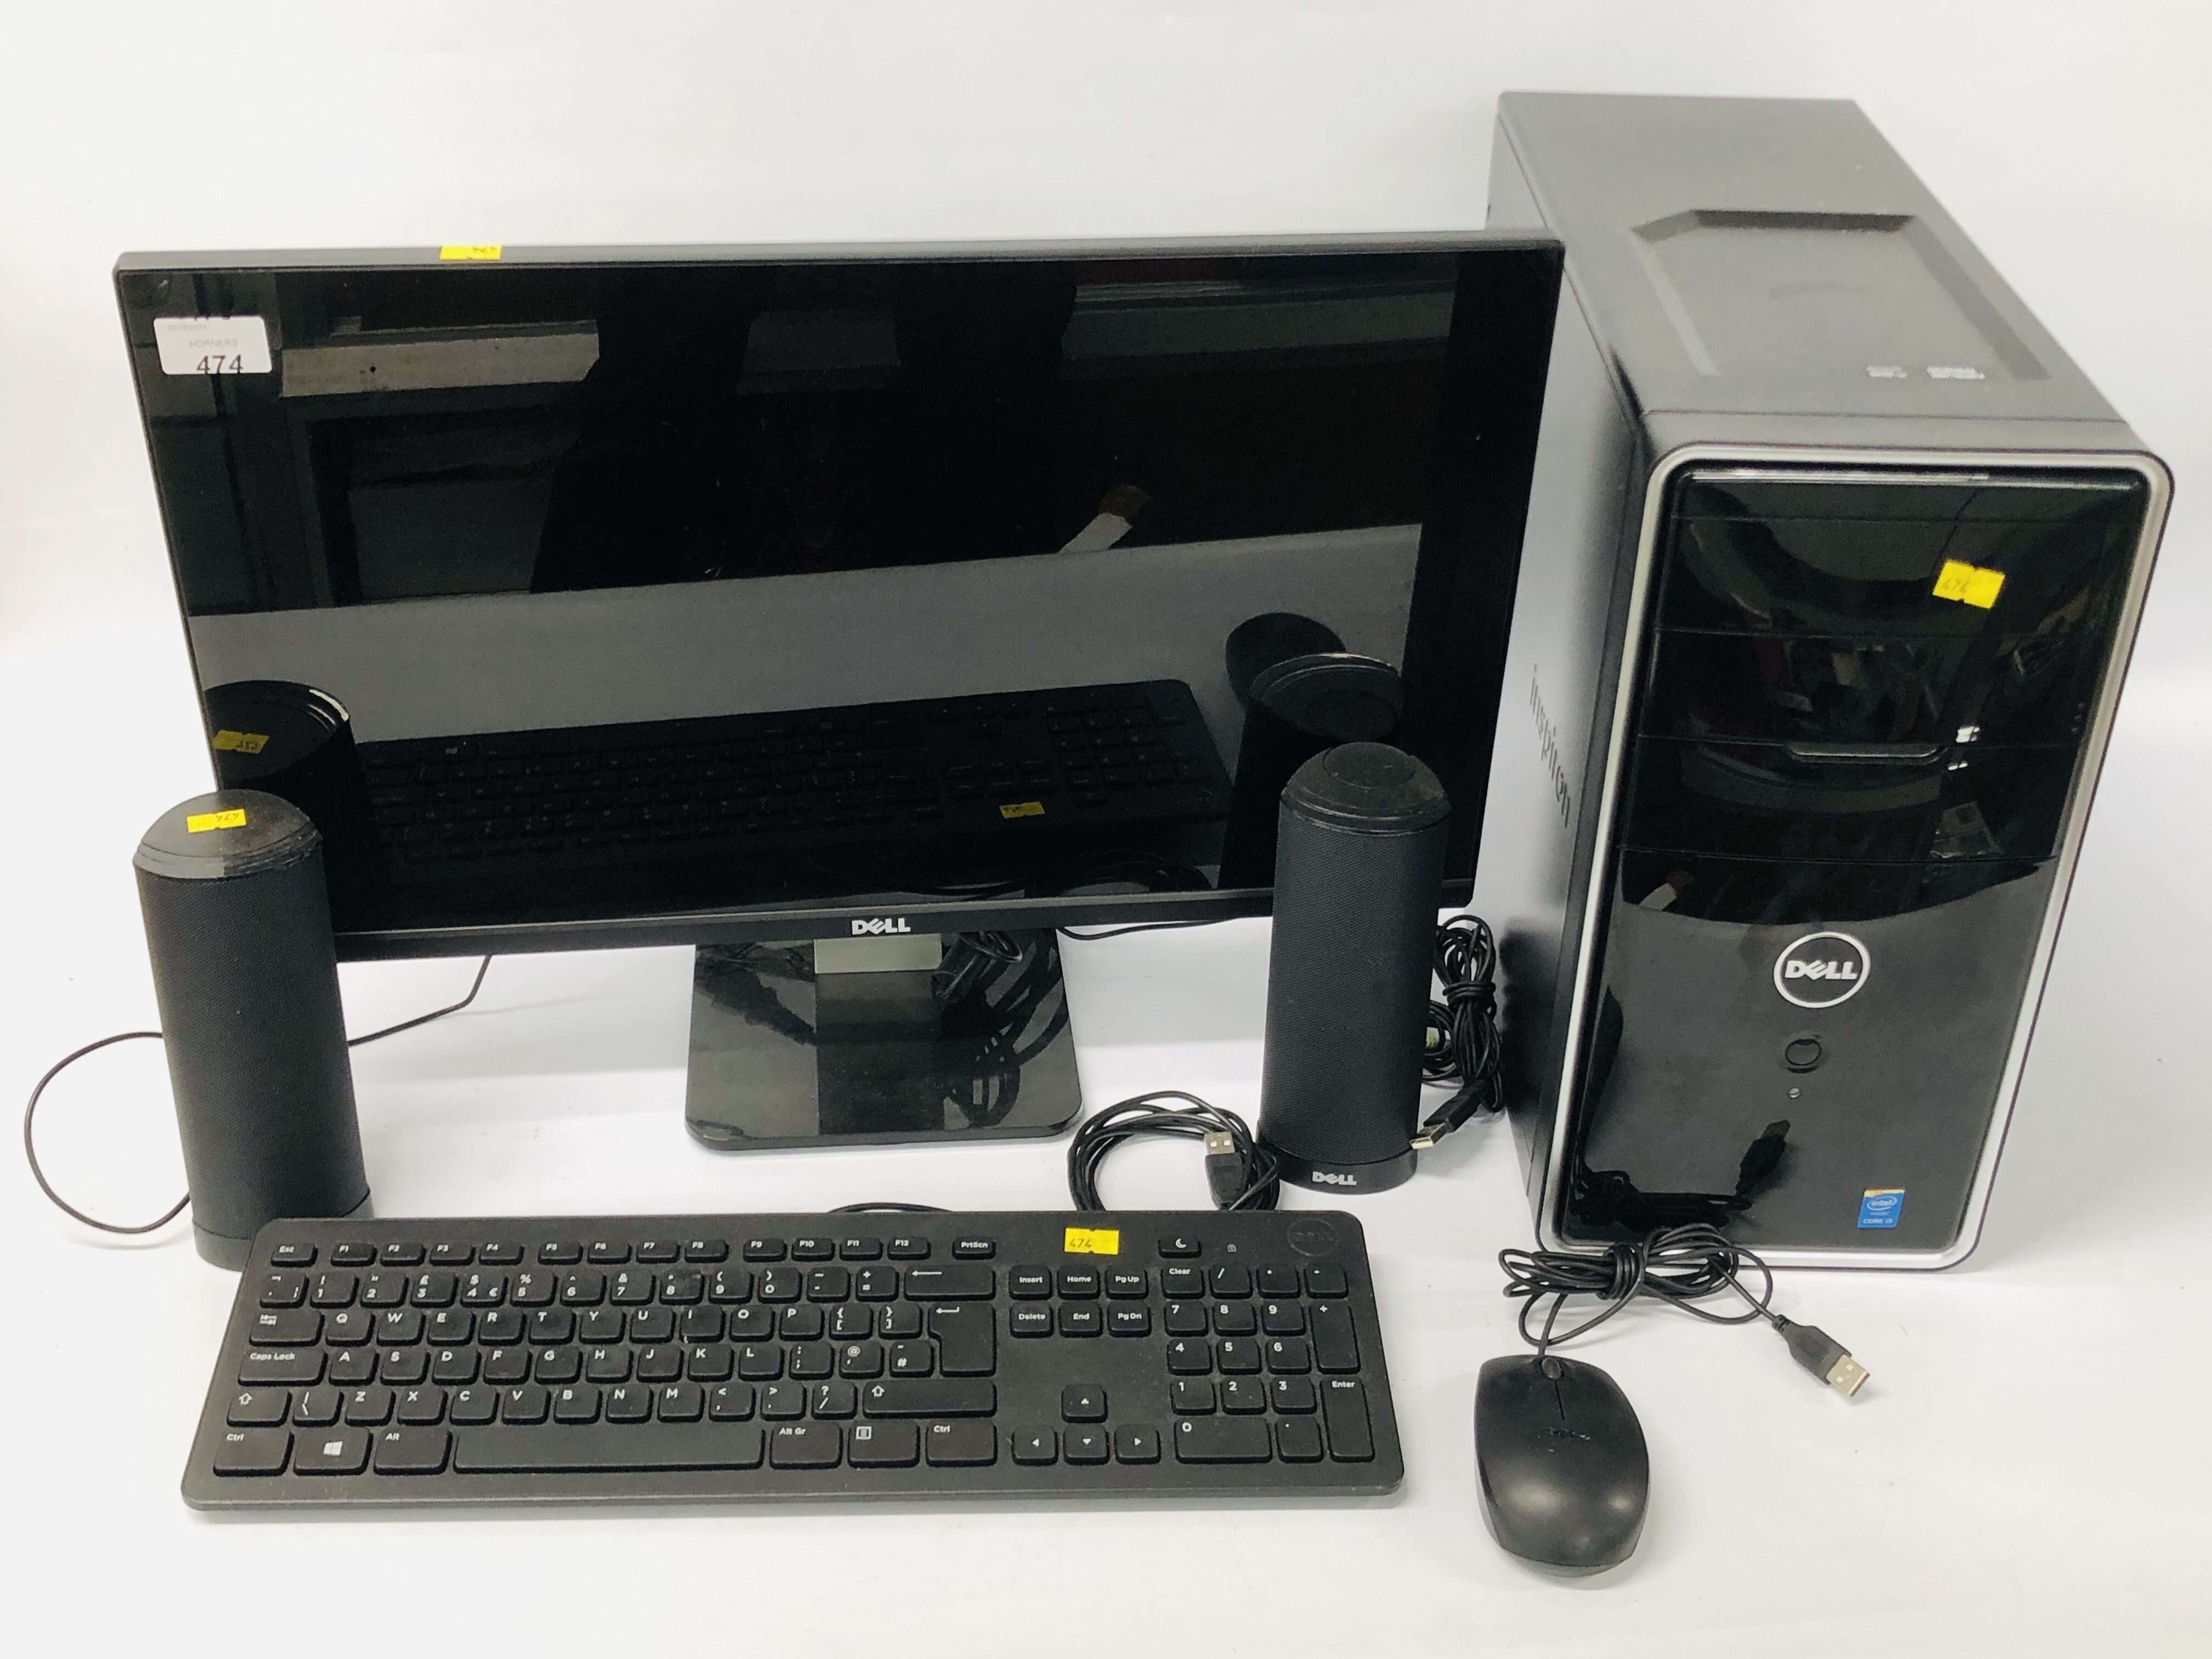 A DELL DESKTOP COMPUTER SYSTEM (HARD DRIVE REMOVED) - SOLD AS SEEN